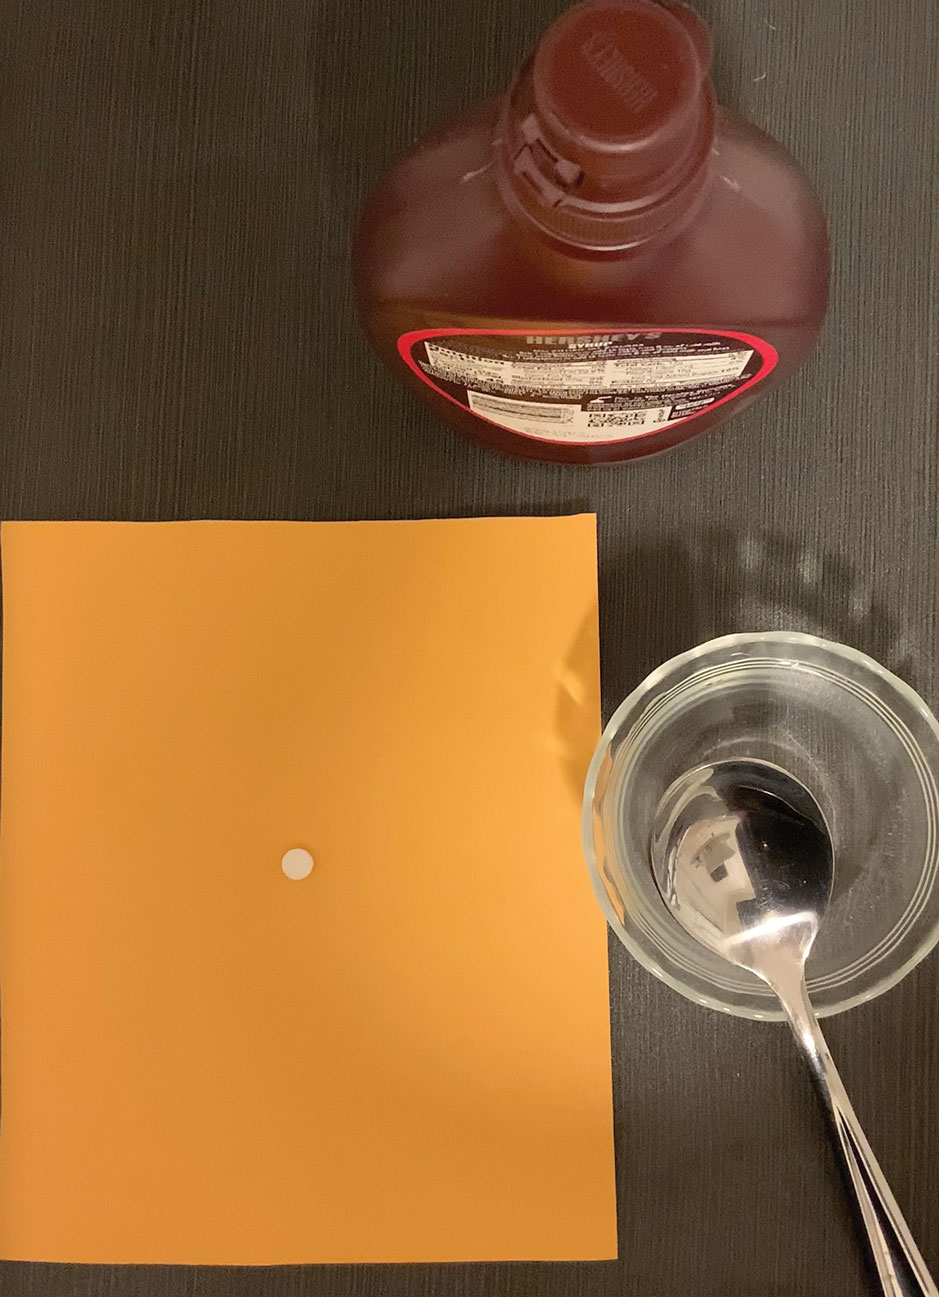 Simple setup for preparing a syrup solution using supplies found in the home. A terbinafine tablet can be crushed and mixed with the syrup.